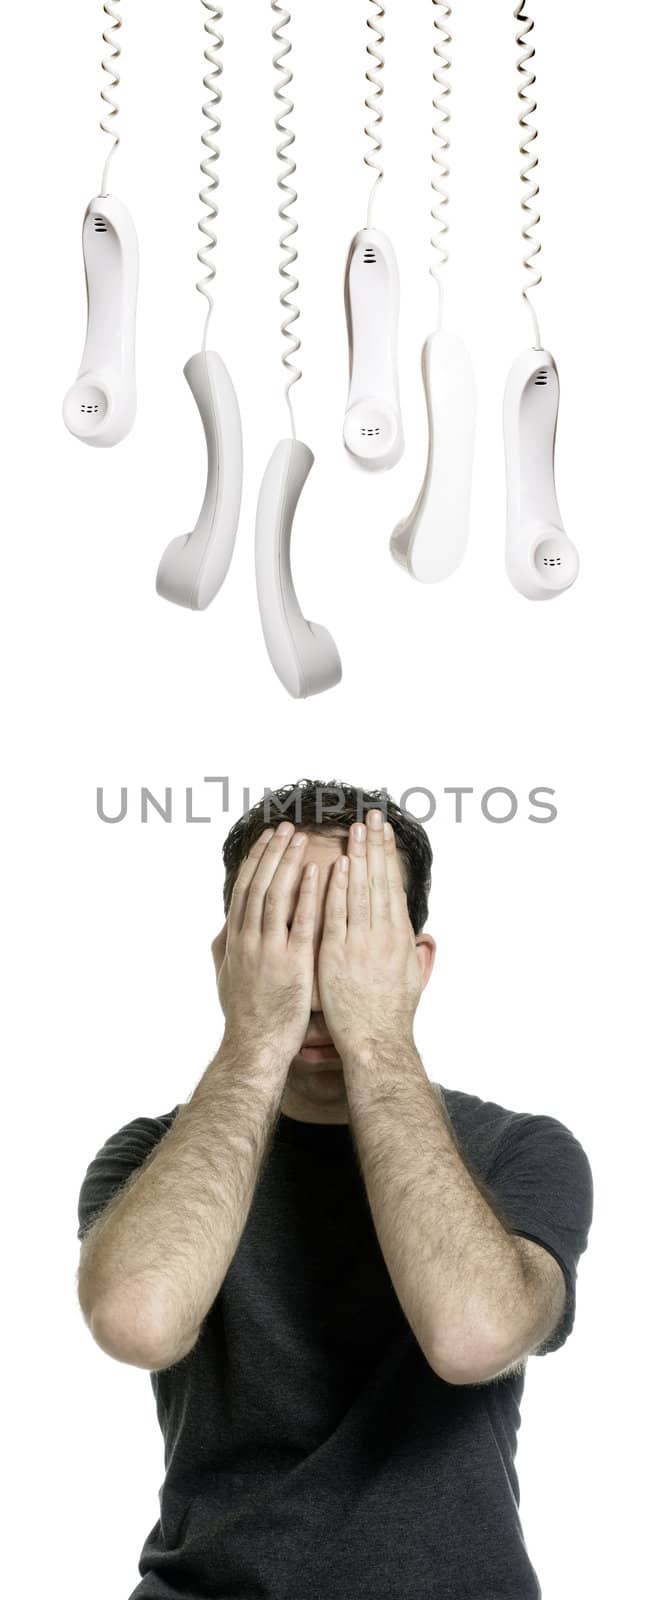 A young man who hates phone calls is hiding from all the telephone receivers, isolated against a white background.